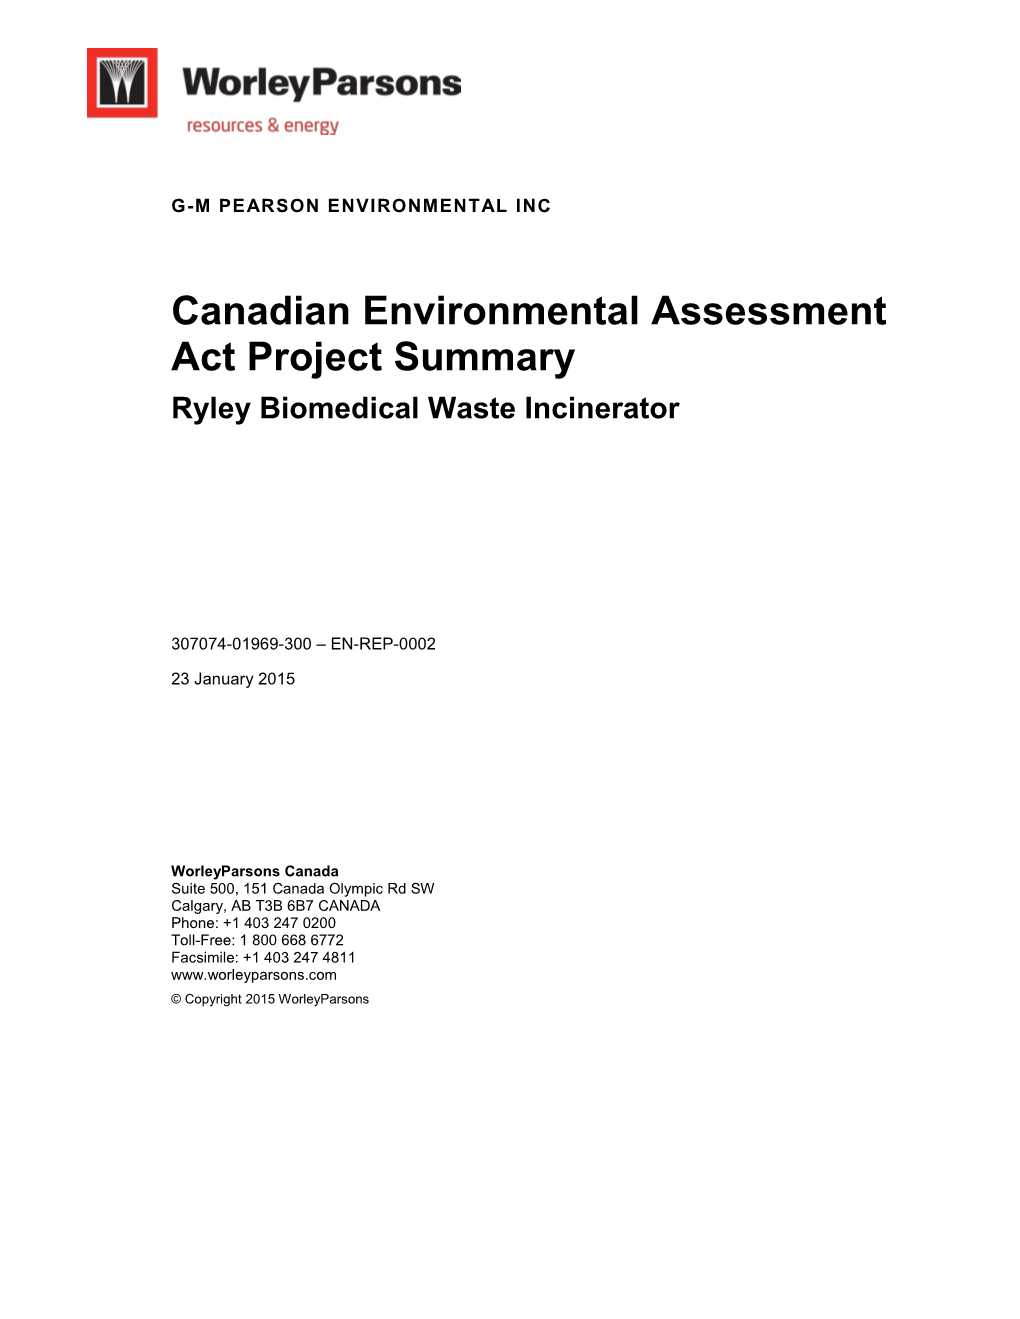 Canadian Environmental Assessment Act Project Summary Ryley Biomedical Waste Incinerator